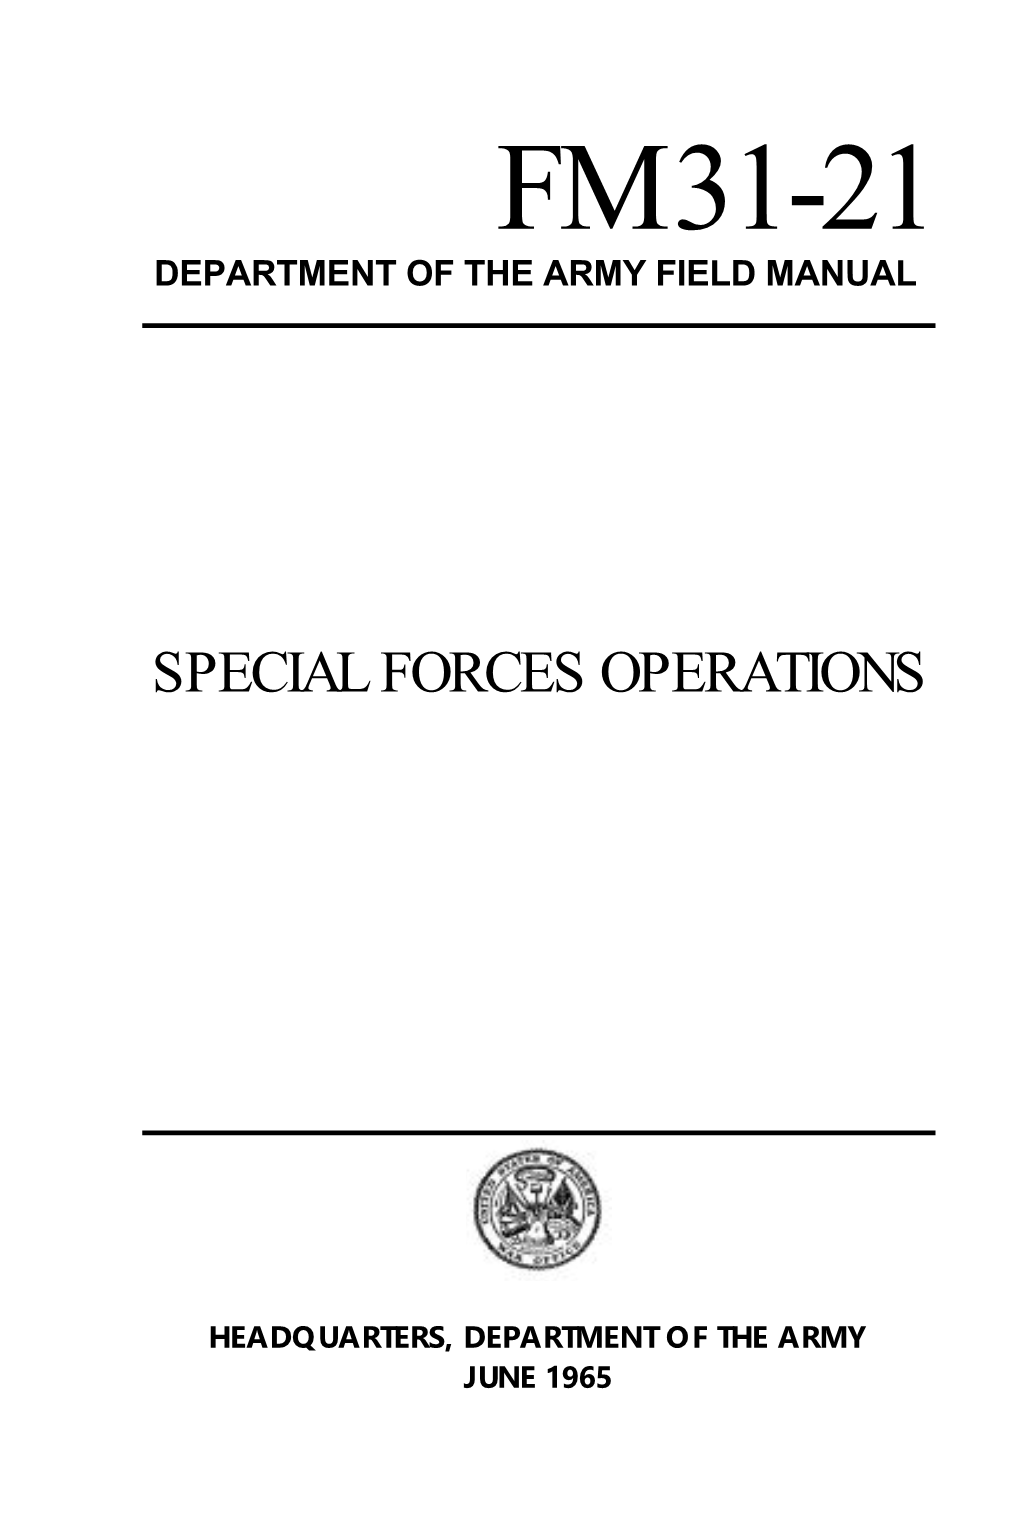 FM 31-21 1965 Guerrilla Warfare and Special Forces Operations